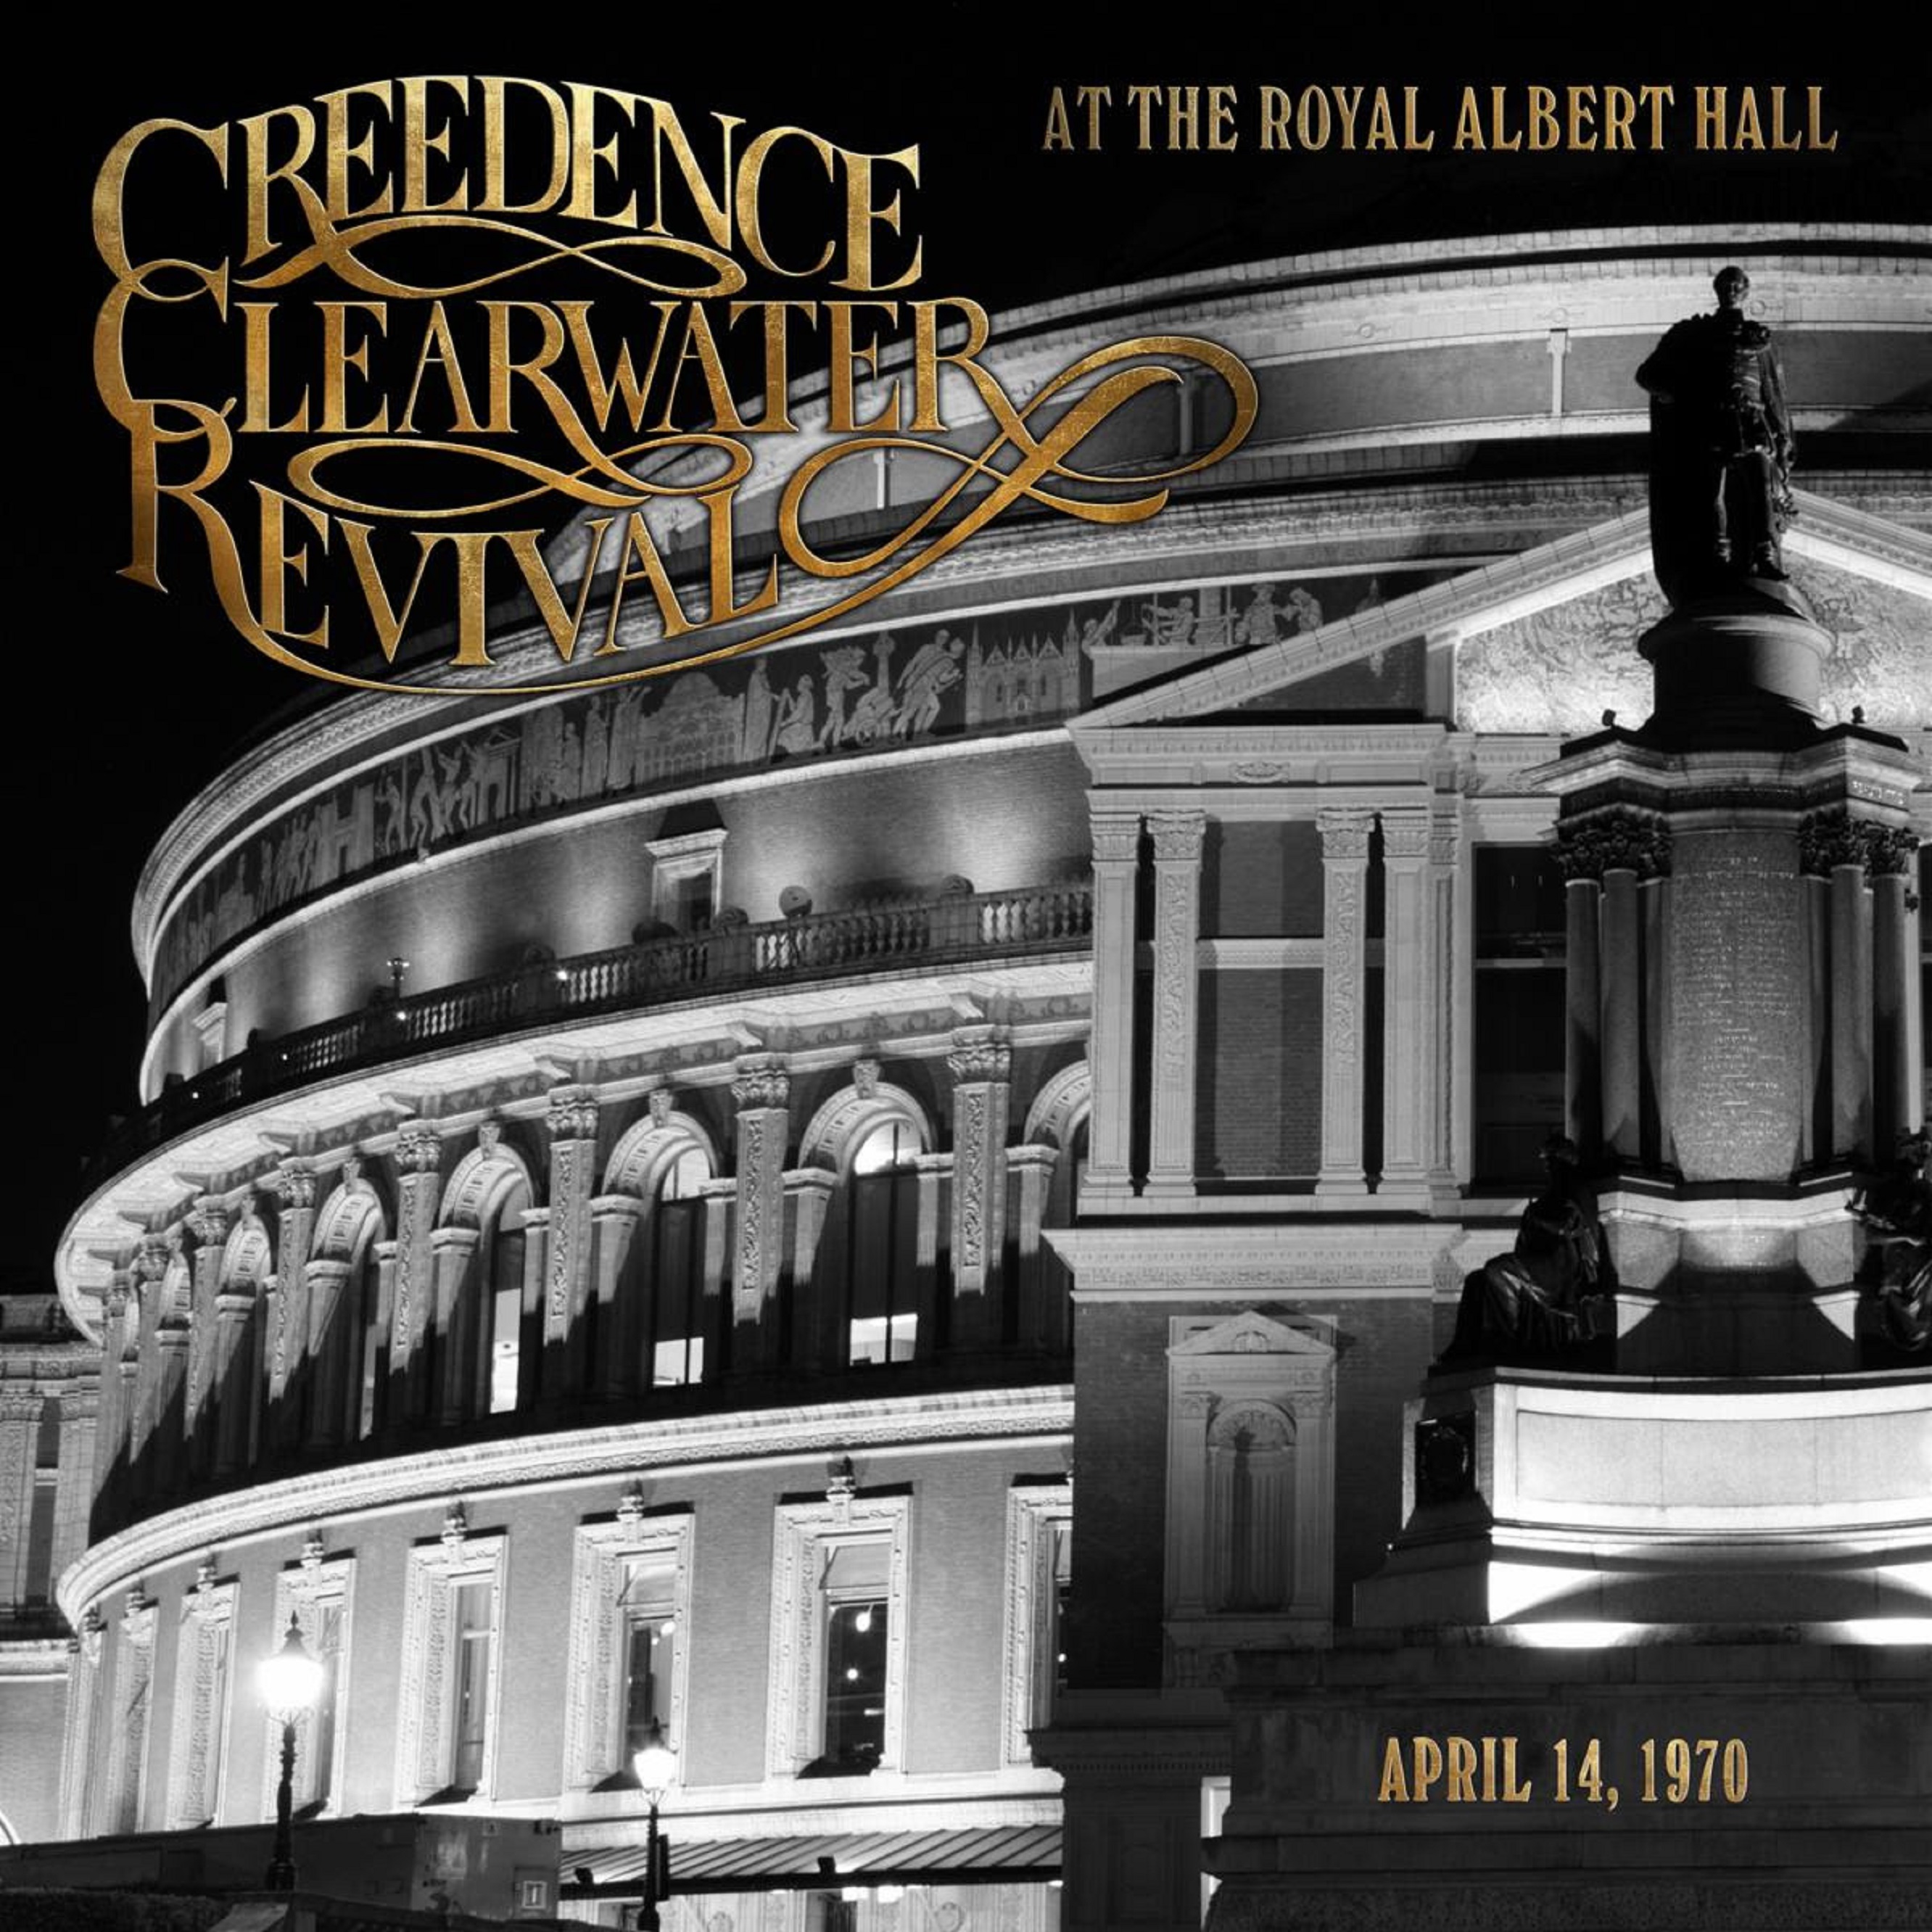 Creedence Clearwater Revival Announces Never-Before-Released Live Album of Legendary 1970 Royal Albert Hall Show